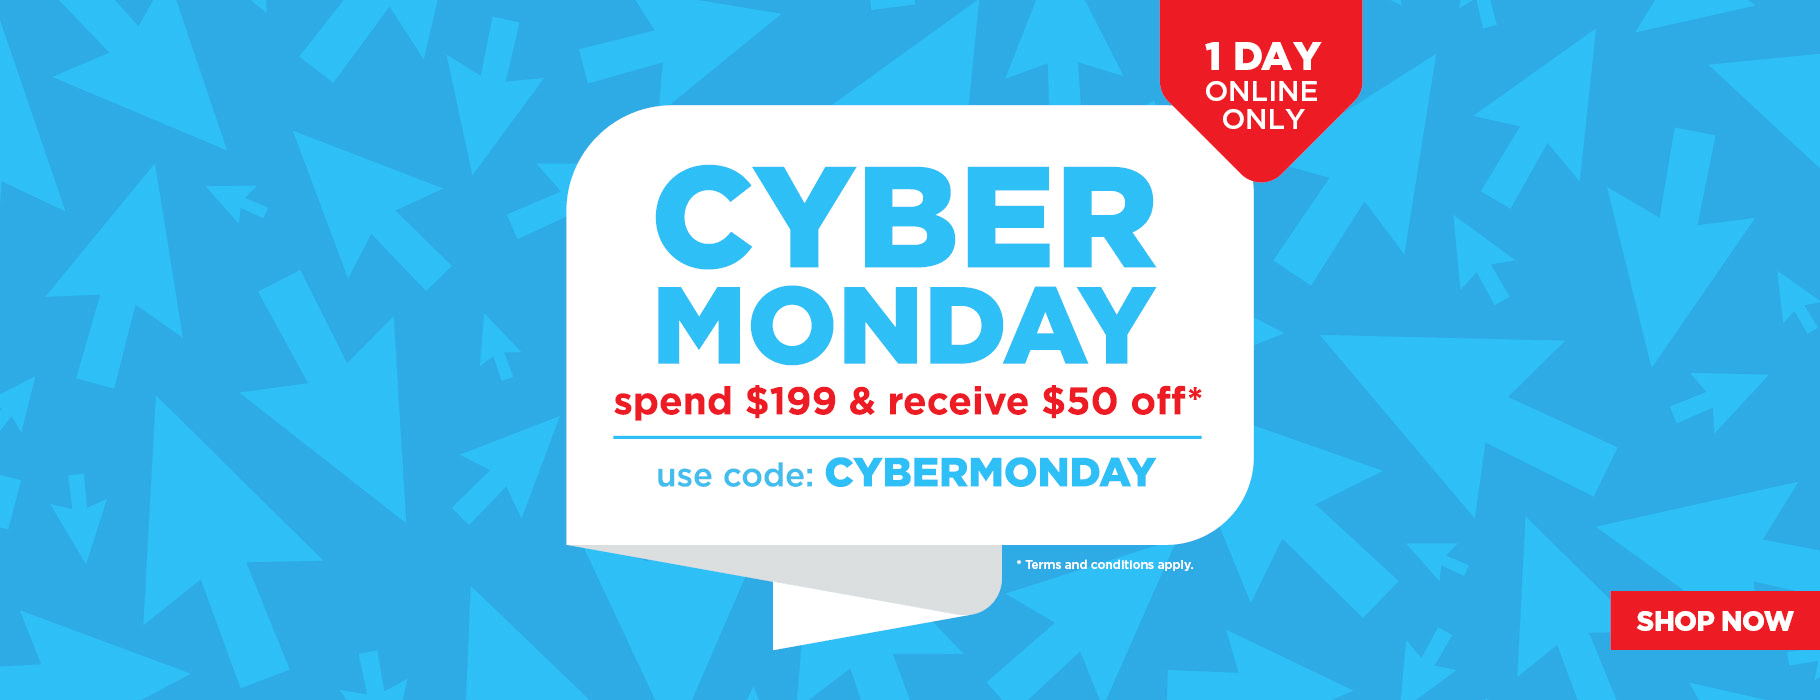 Amart Furniture Cyber Monday extra $50 OFF $199 with discount code